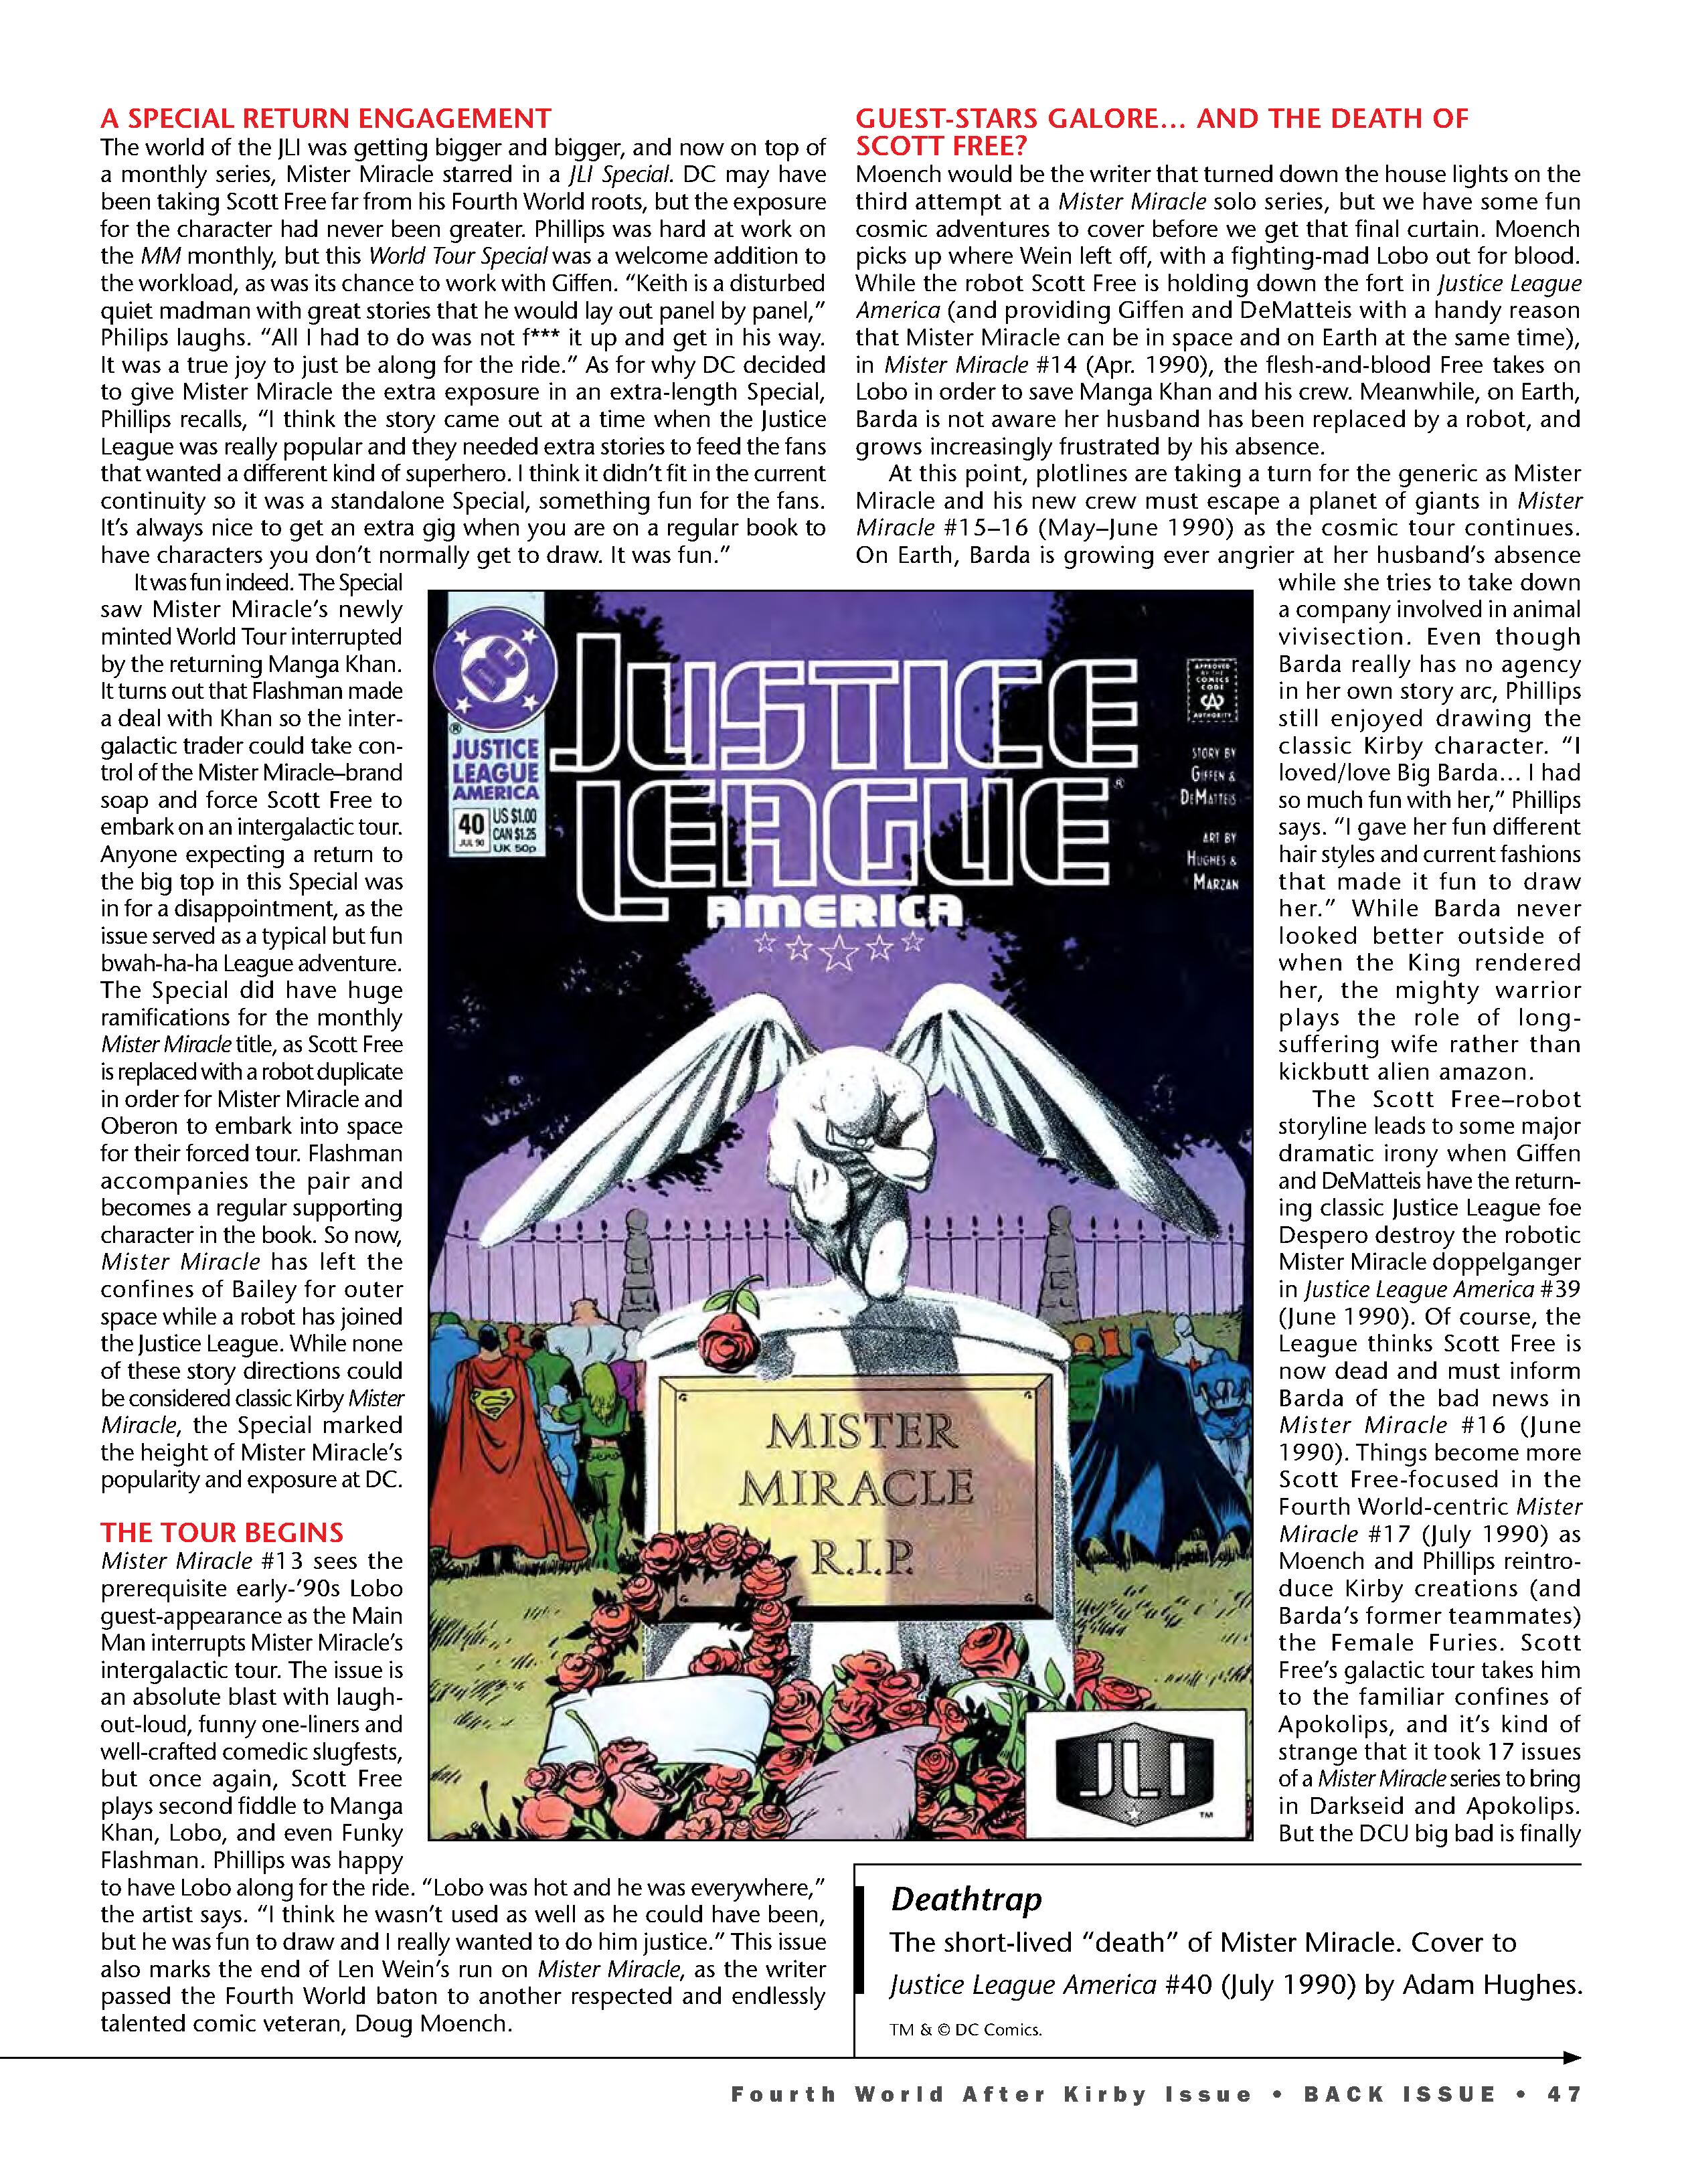 Read online Back Issue comic -  Issue #104 - 49